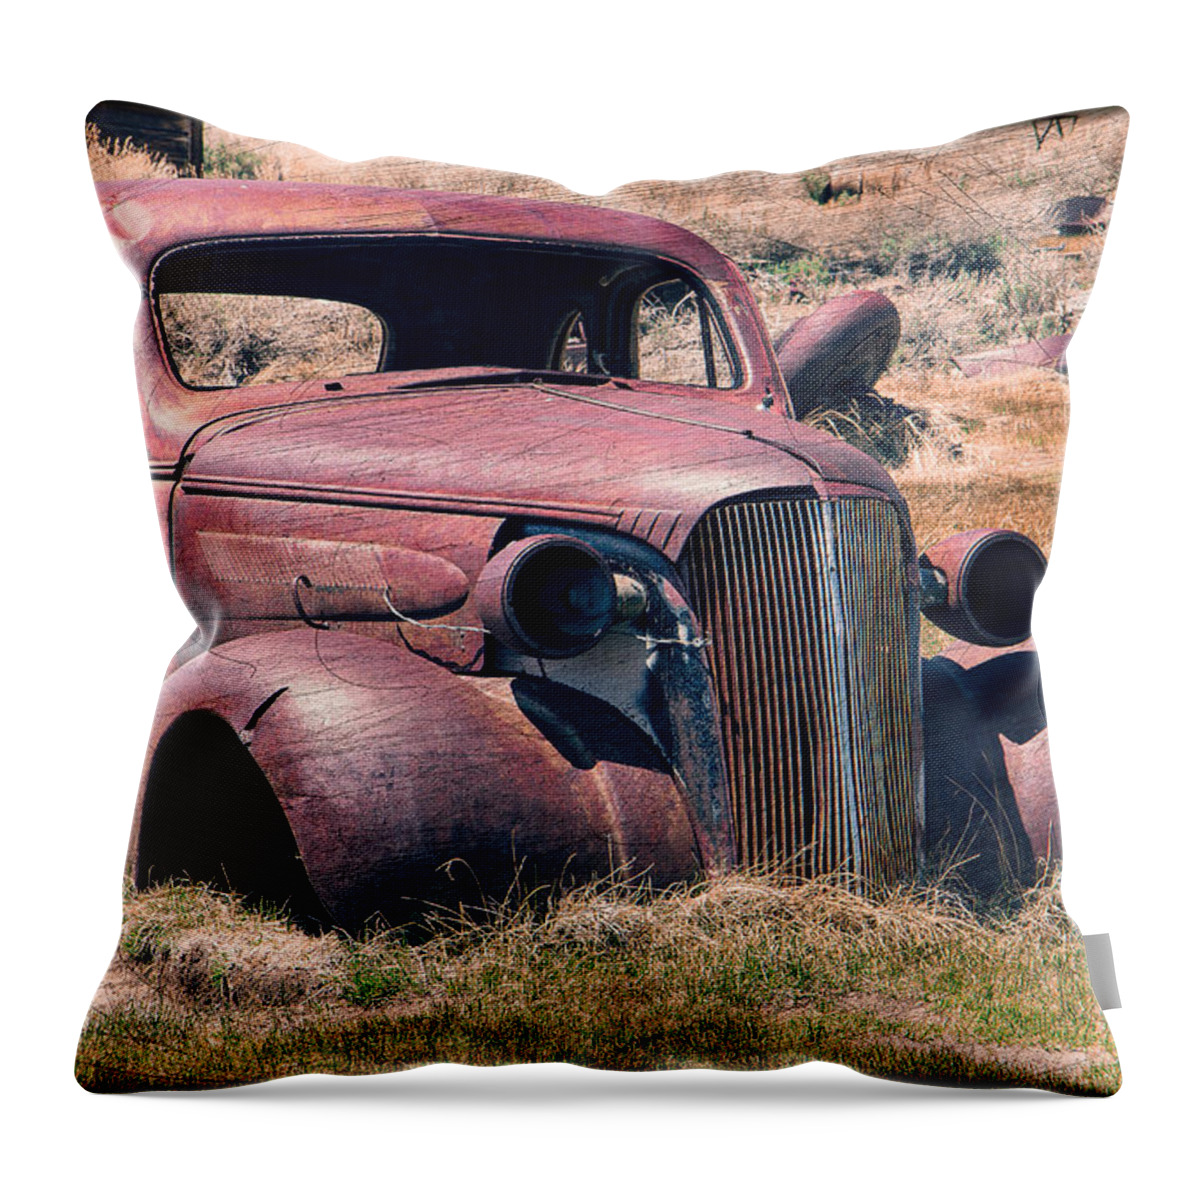 Made In America Throw Pillow featuring the photograph Low Rider by Steven Bateson